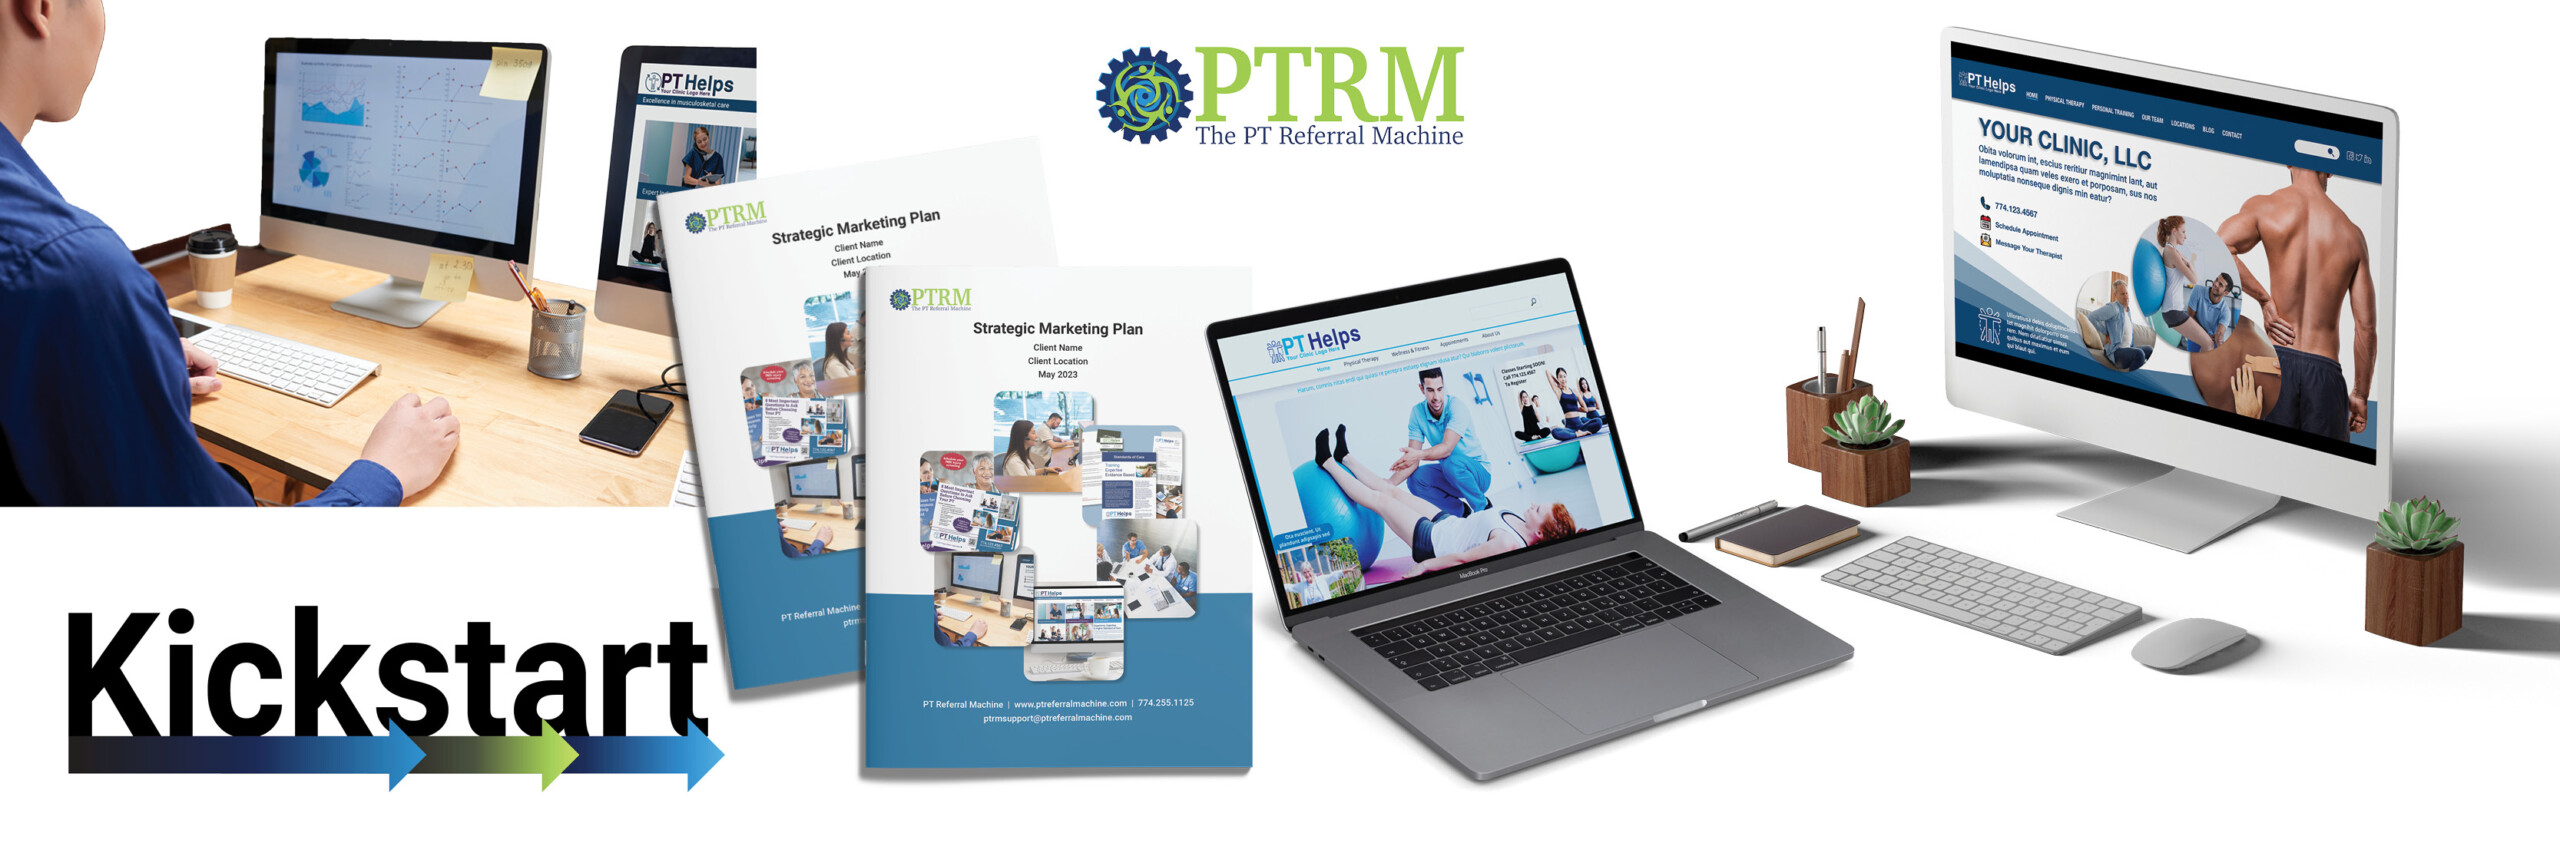 image of the materials provided in the free physical therapy marketing trial